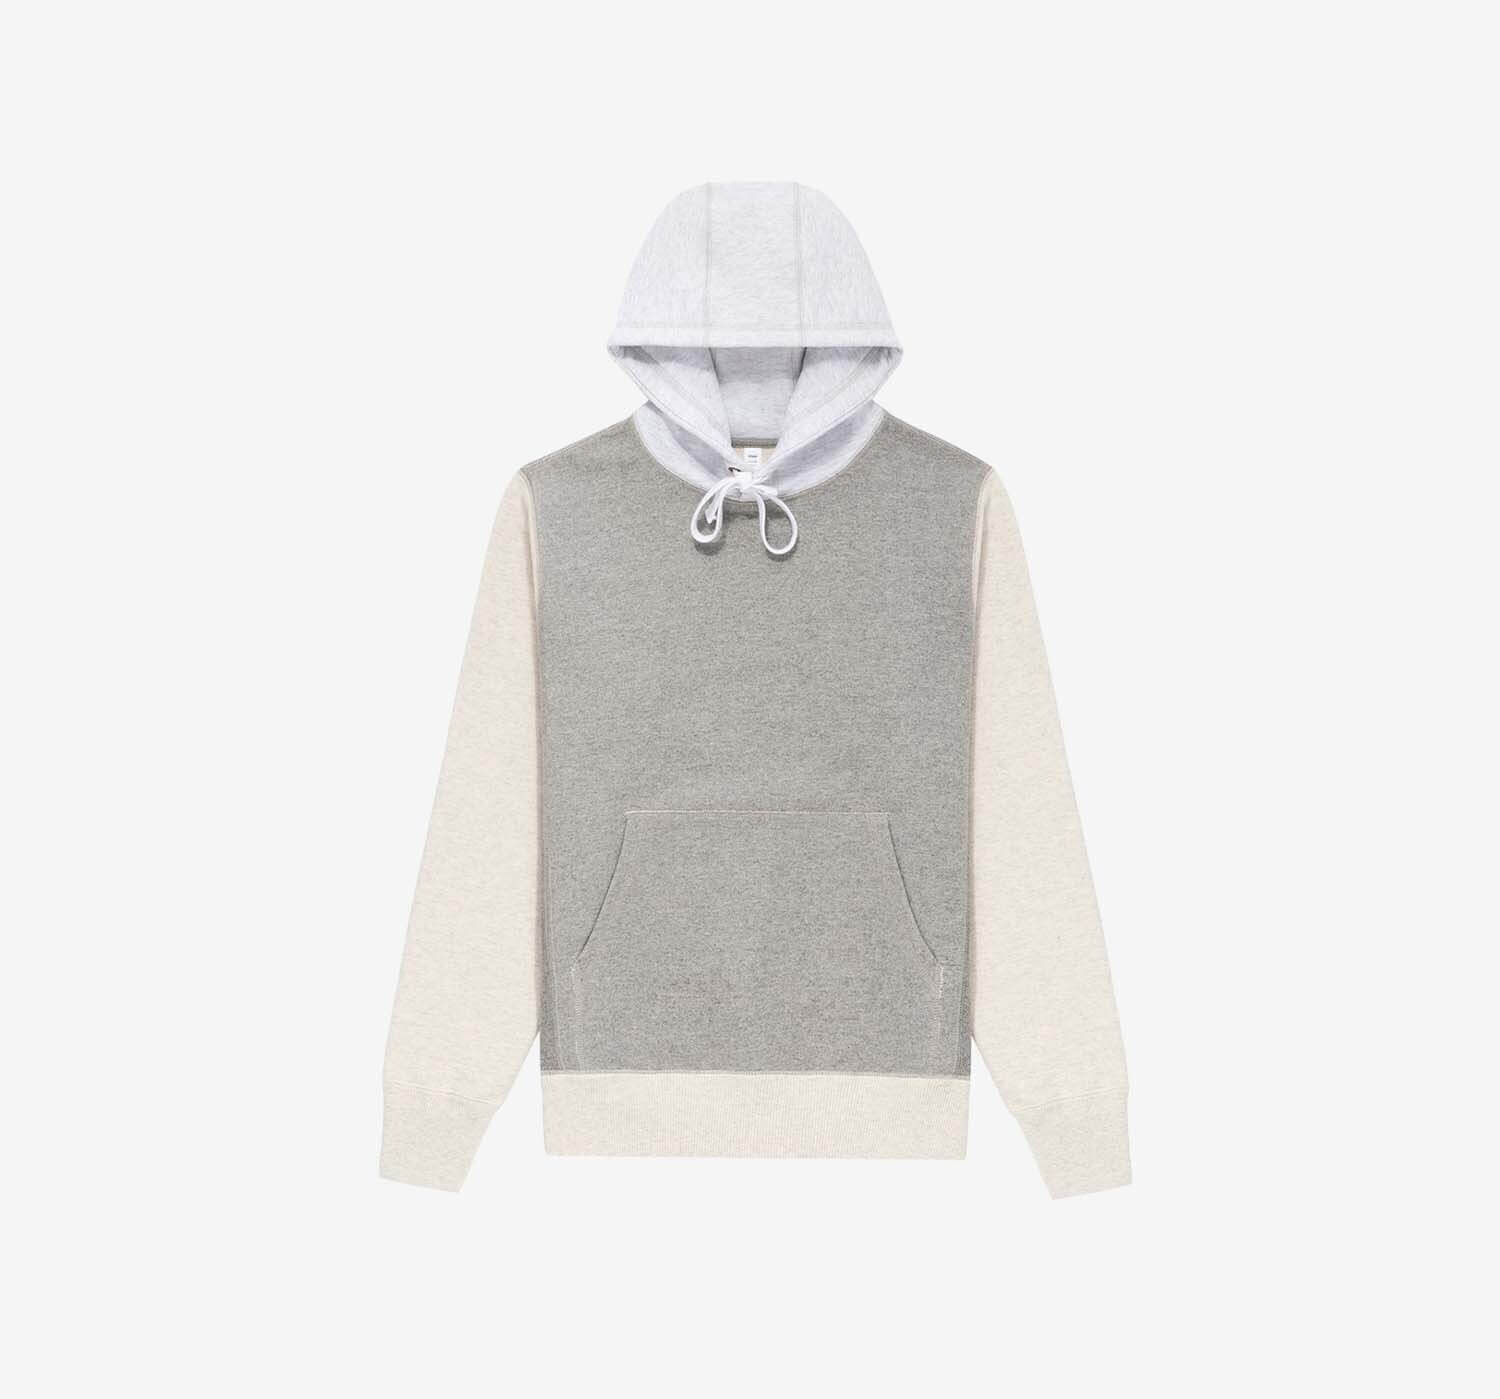 OC Core Hoodie | Colorblock 2 - Oliver Cabell